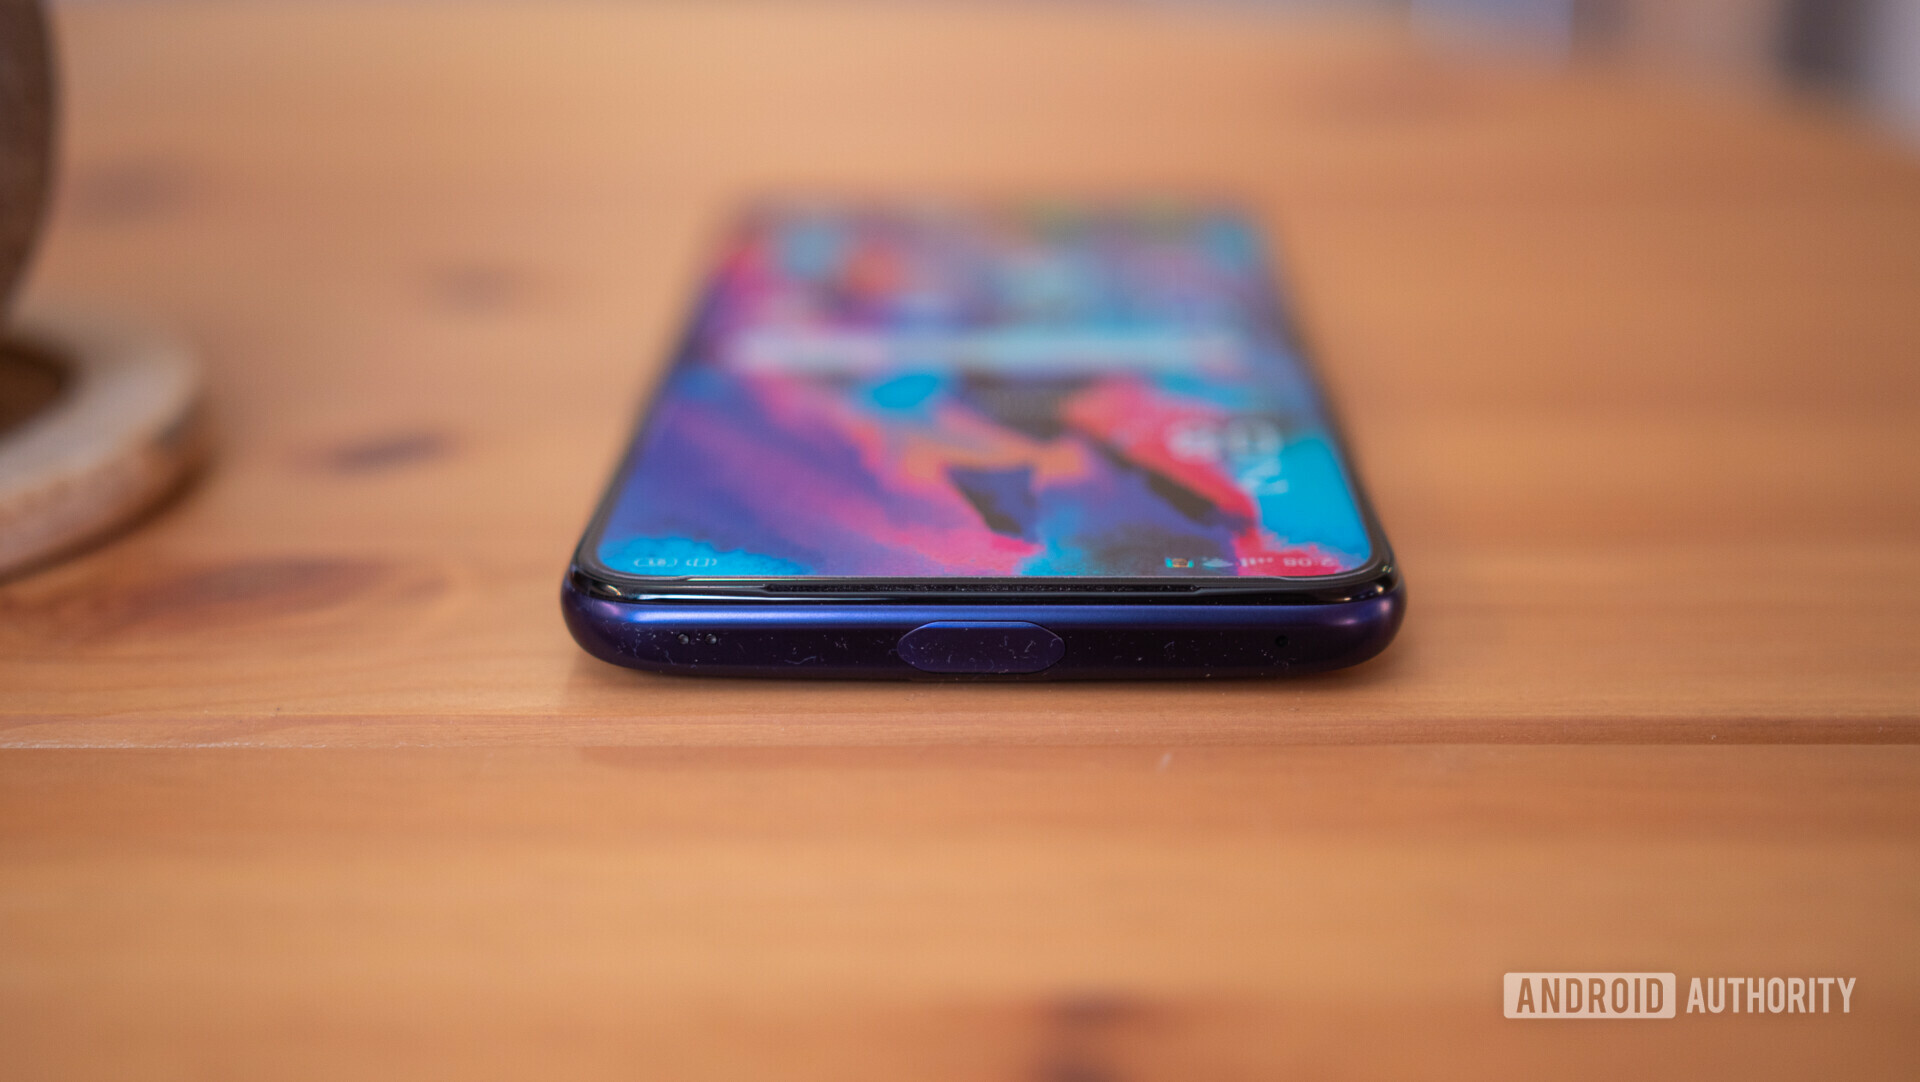 Top side view of the OPPO F11 Pro laid on a desk.